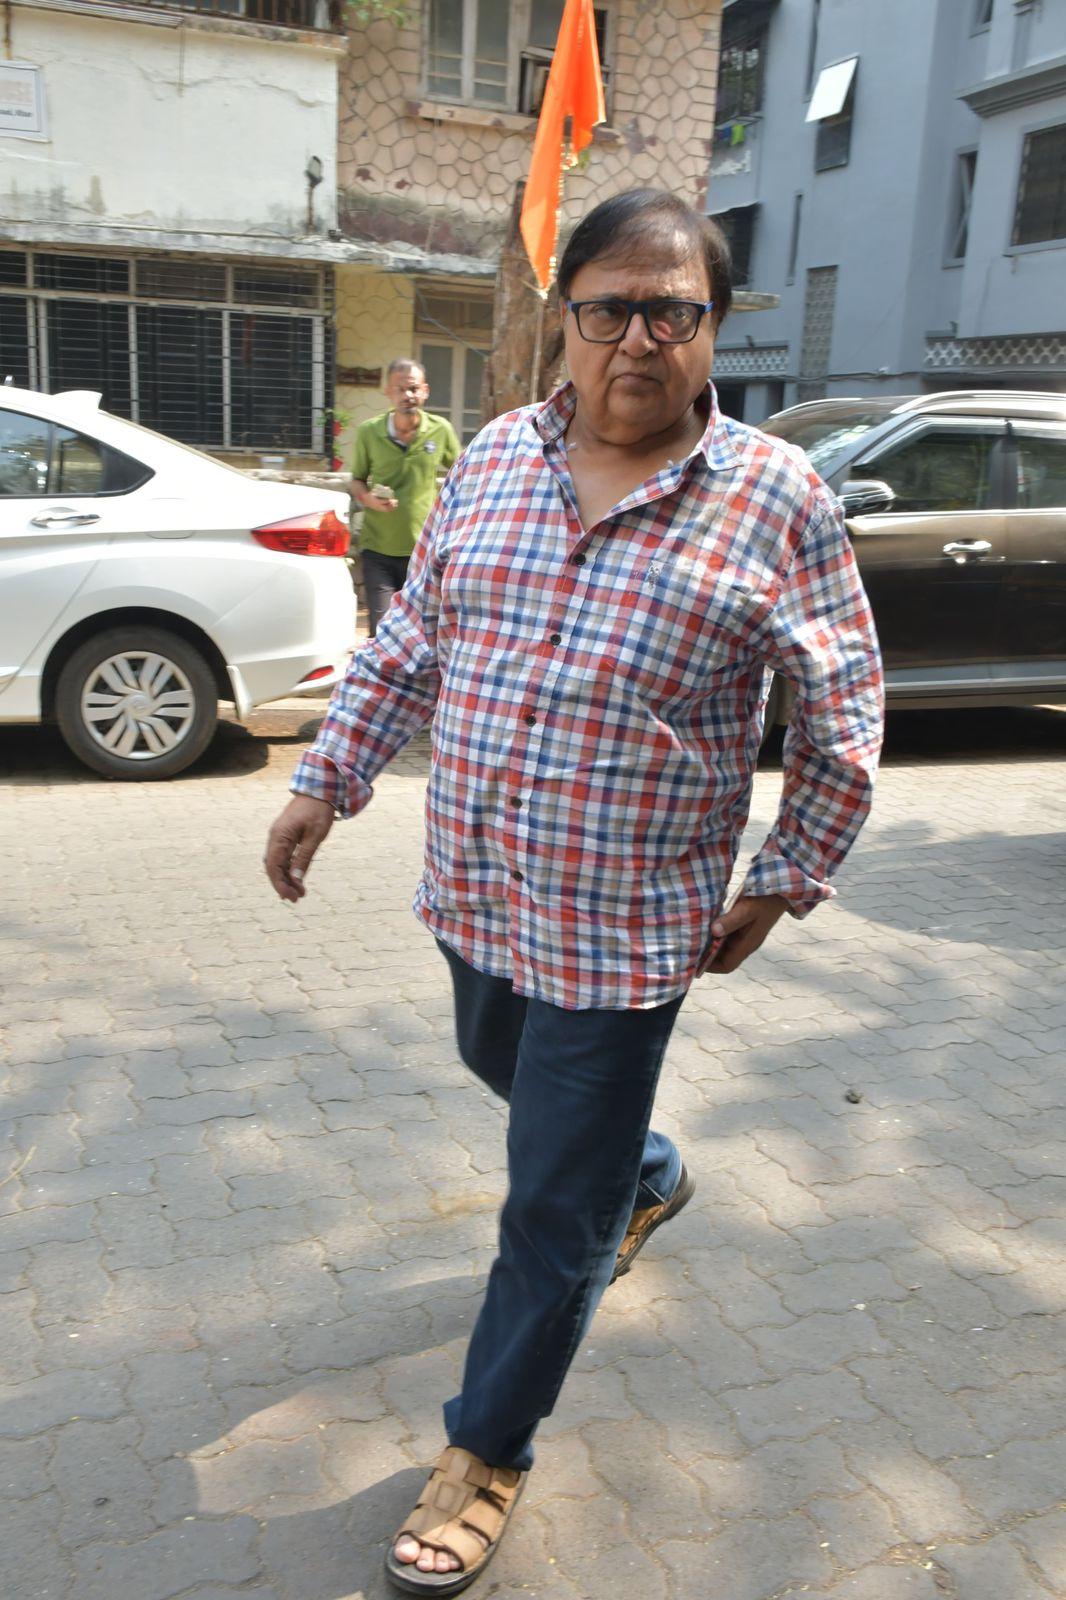 Rakesh Bedi made his entry at the funeral to show up for his late friend